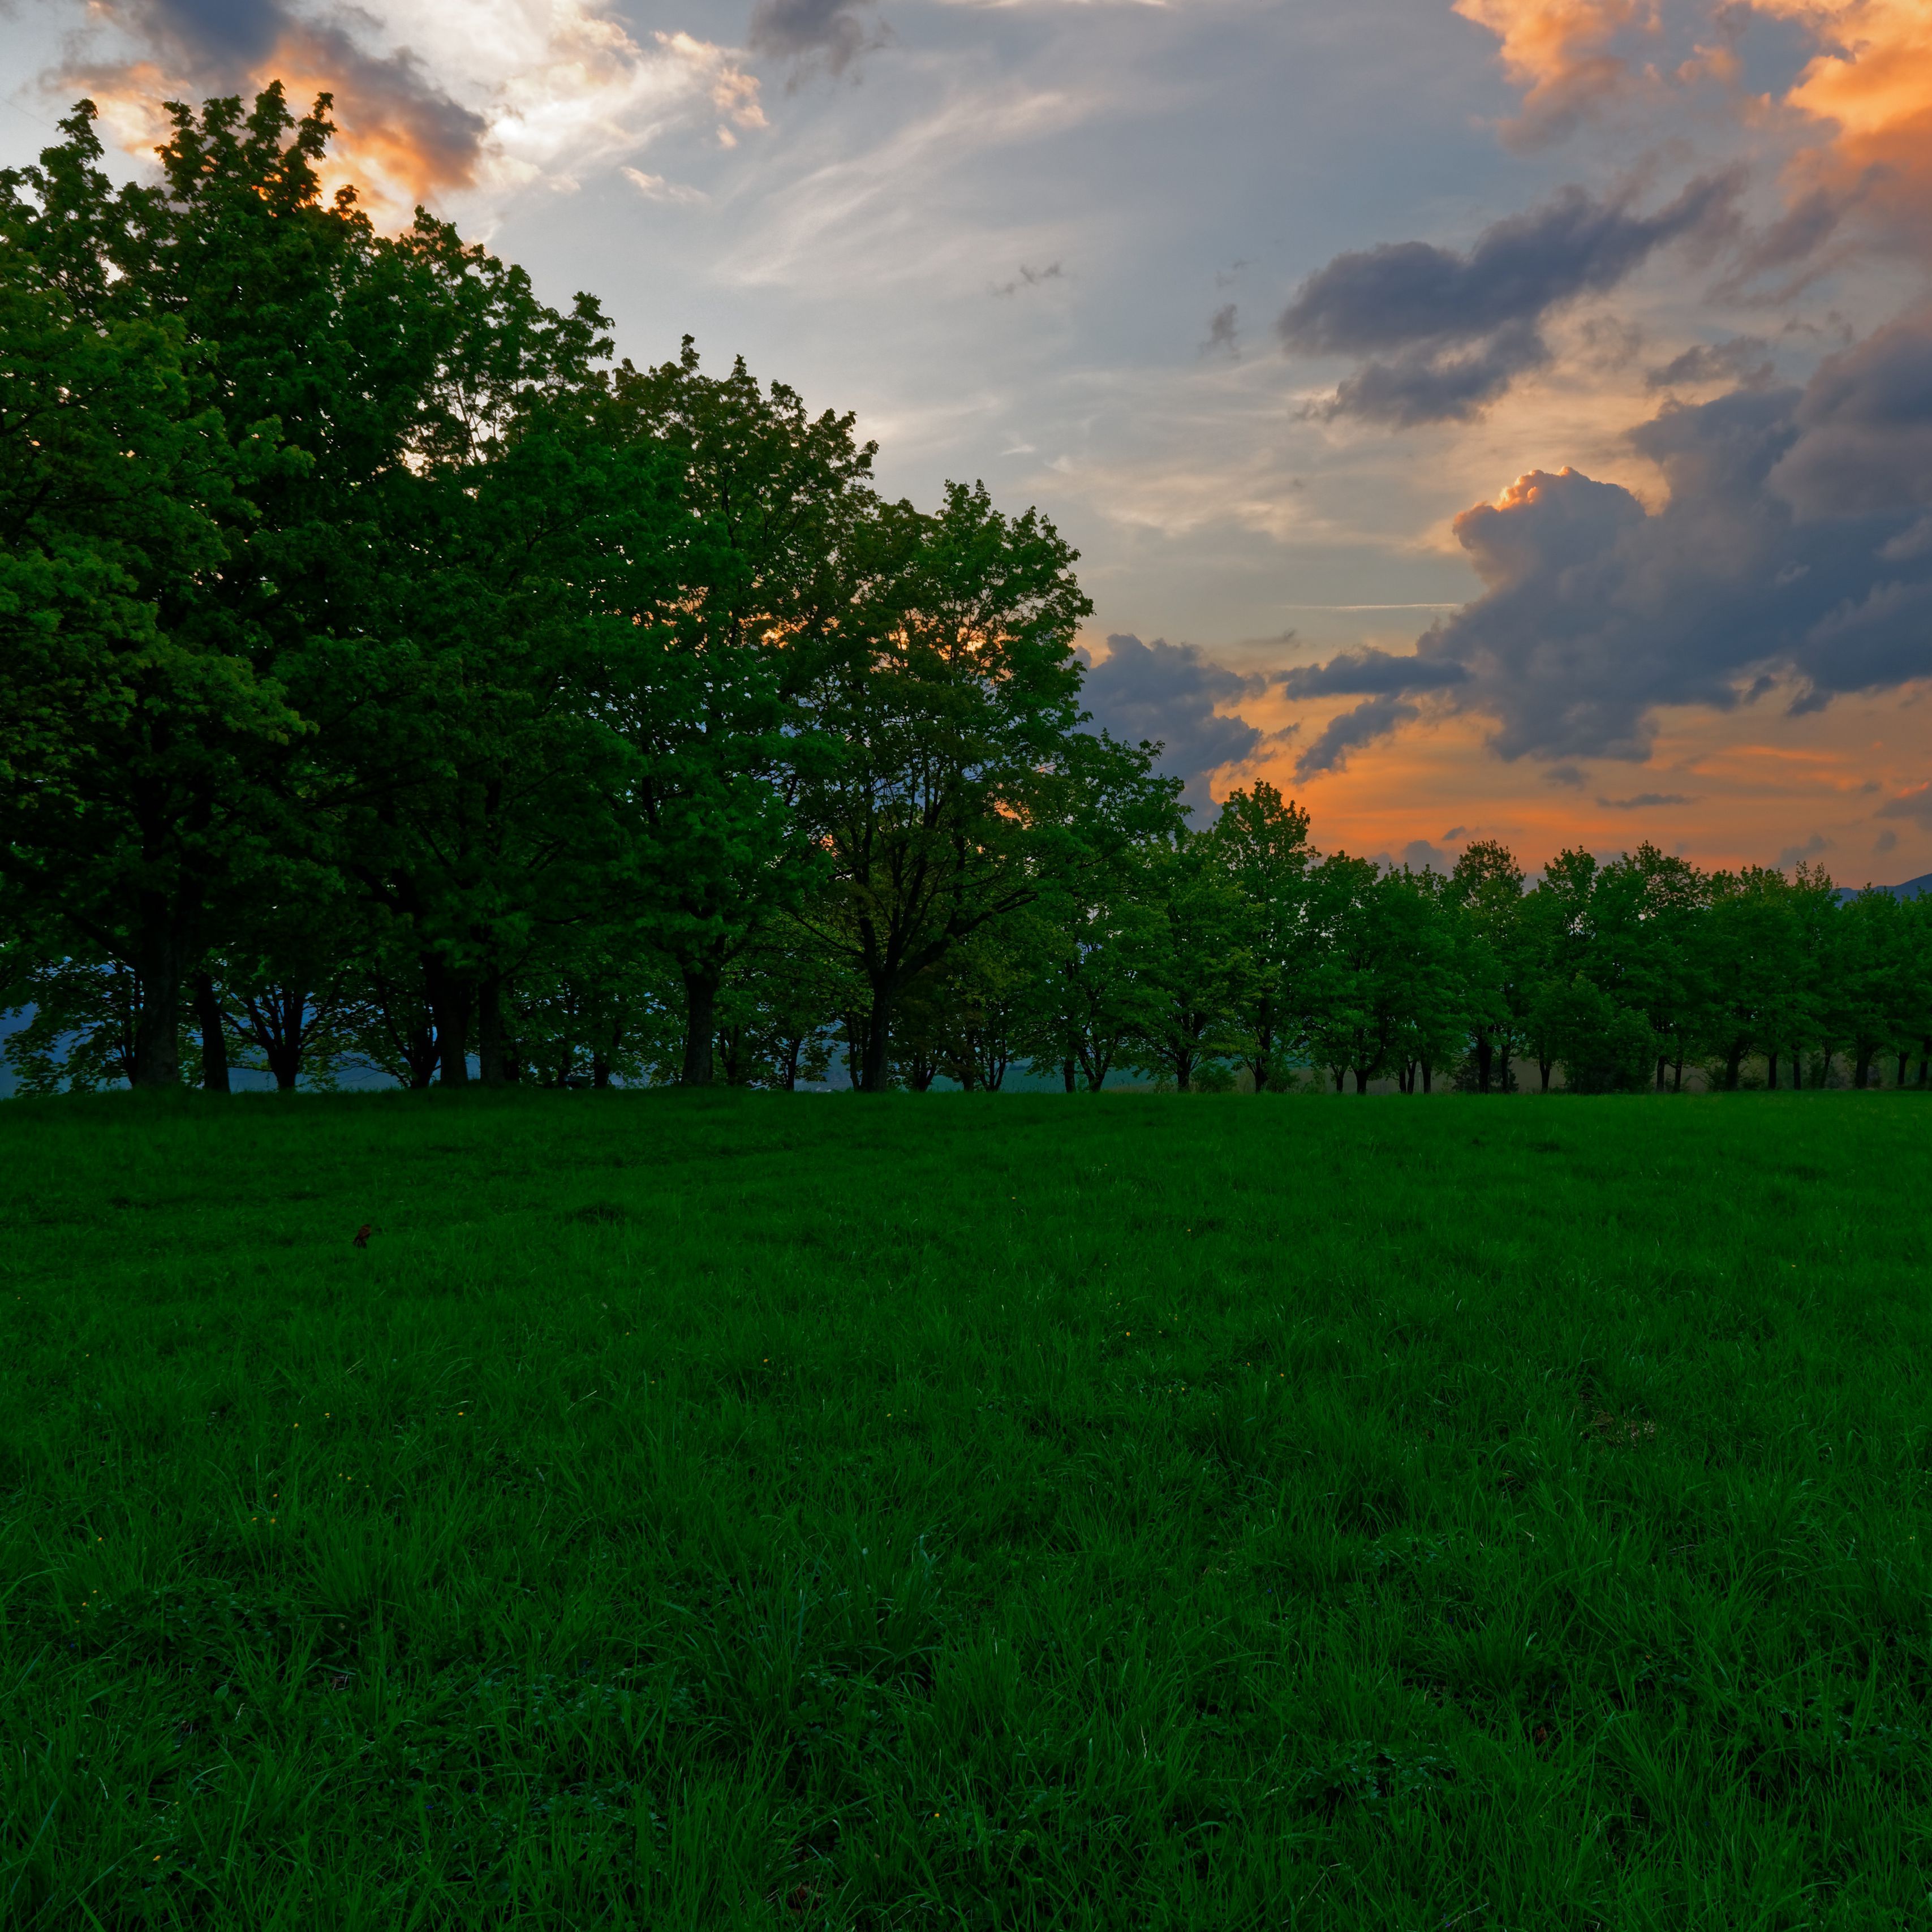 Download wallpaper 3415x3415 sunset, meadow, grass, trees ipad pro 12.9 retina for parallax HD background